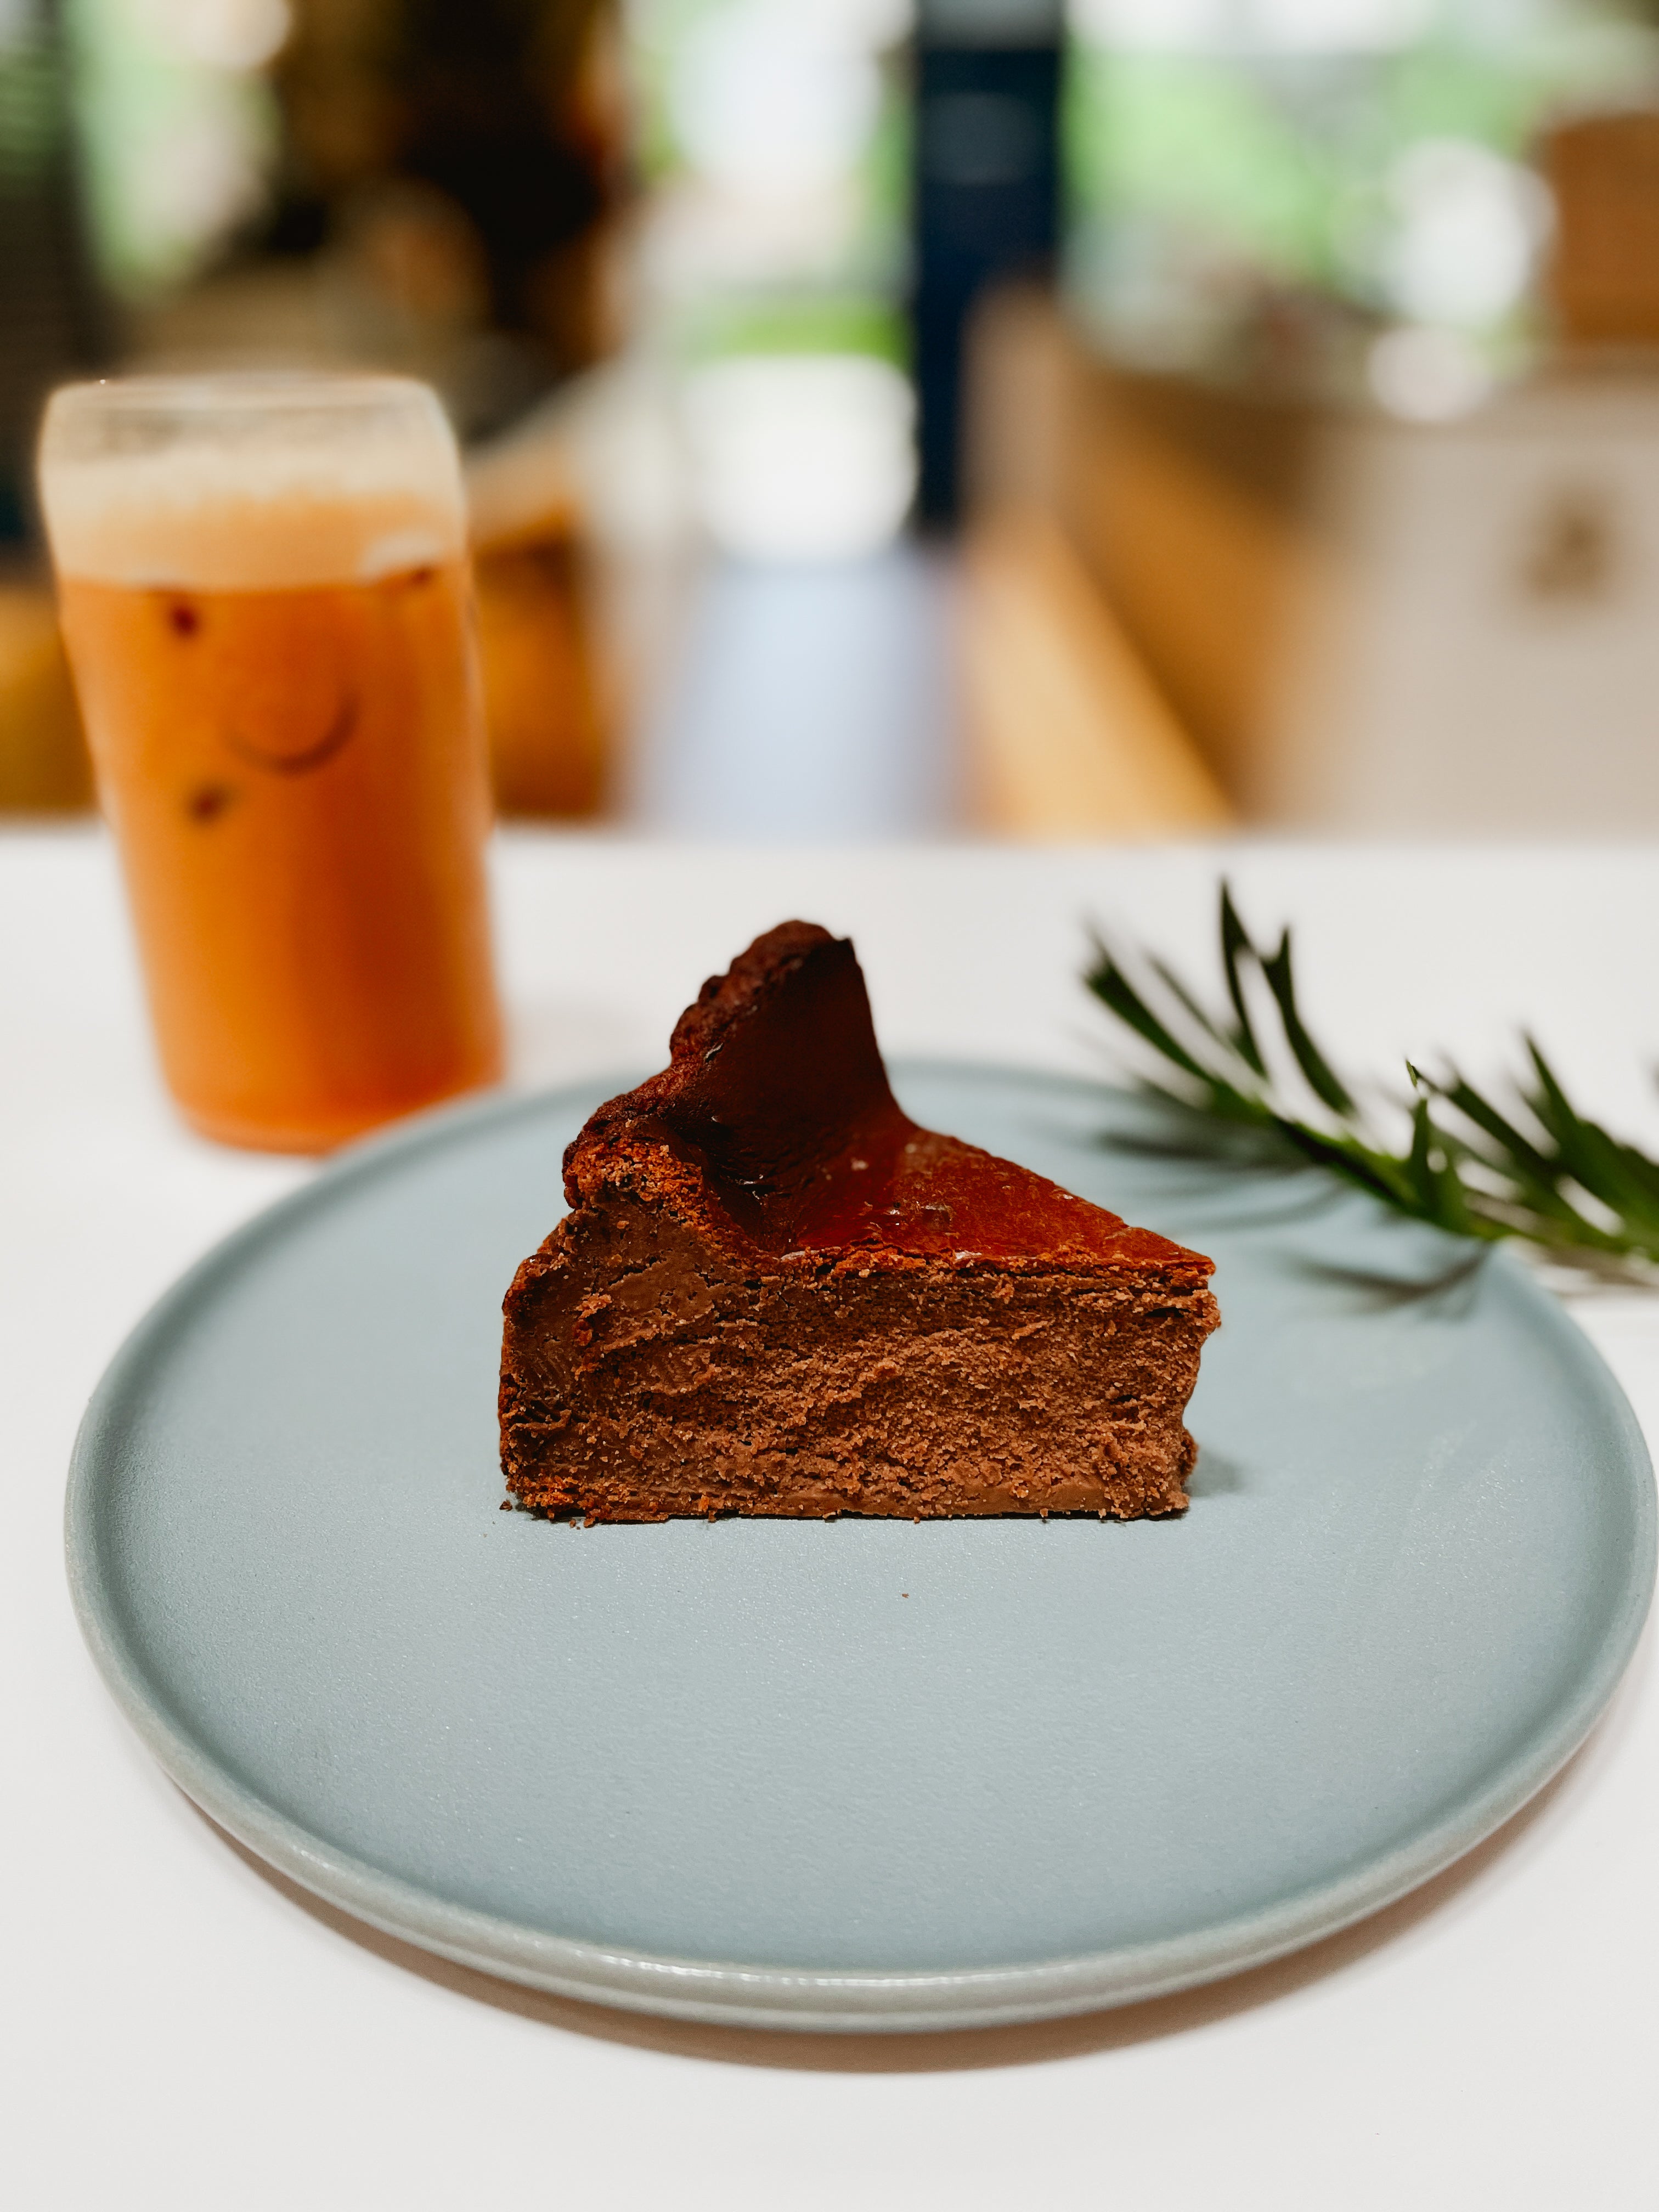 Indulge your palate like never before with the Dark Chocolate Basque Burnt Cheesecake.